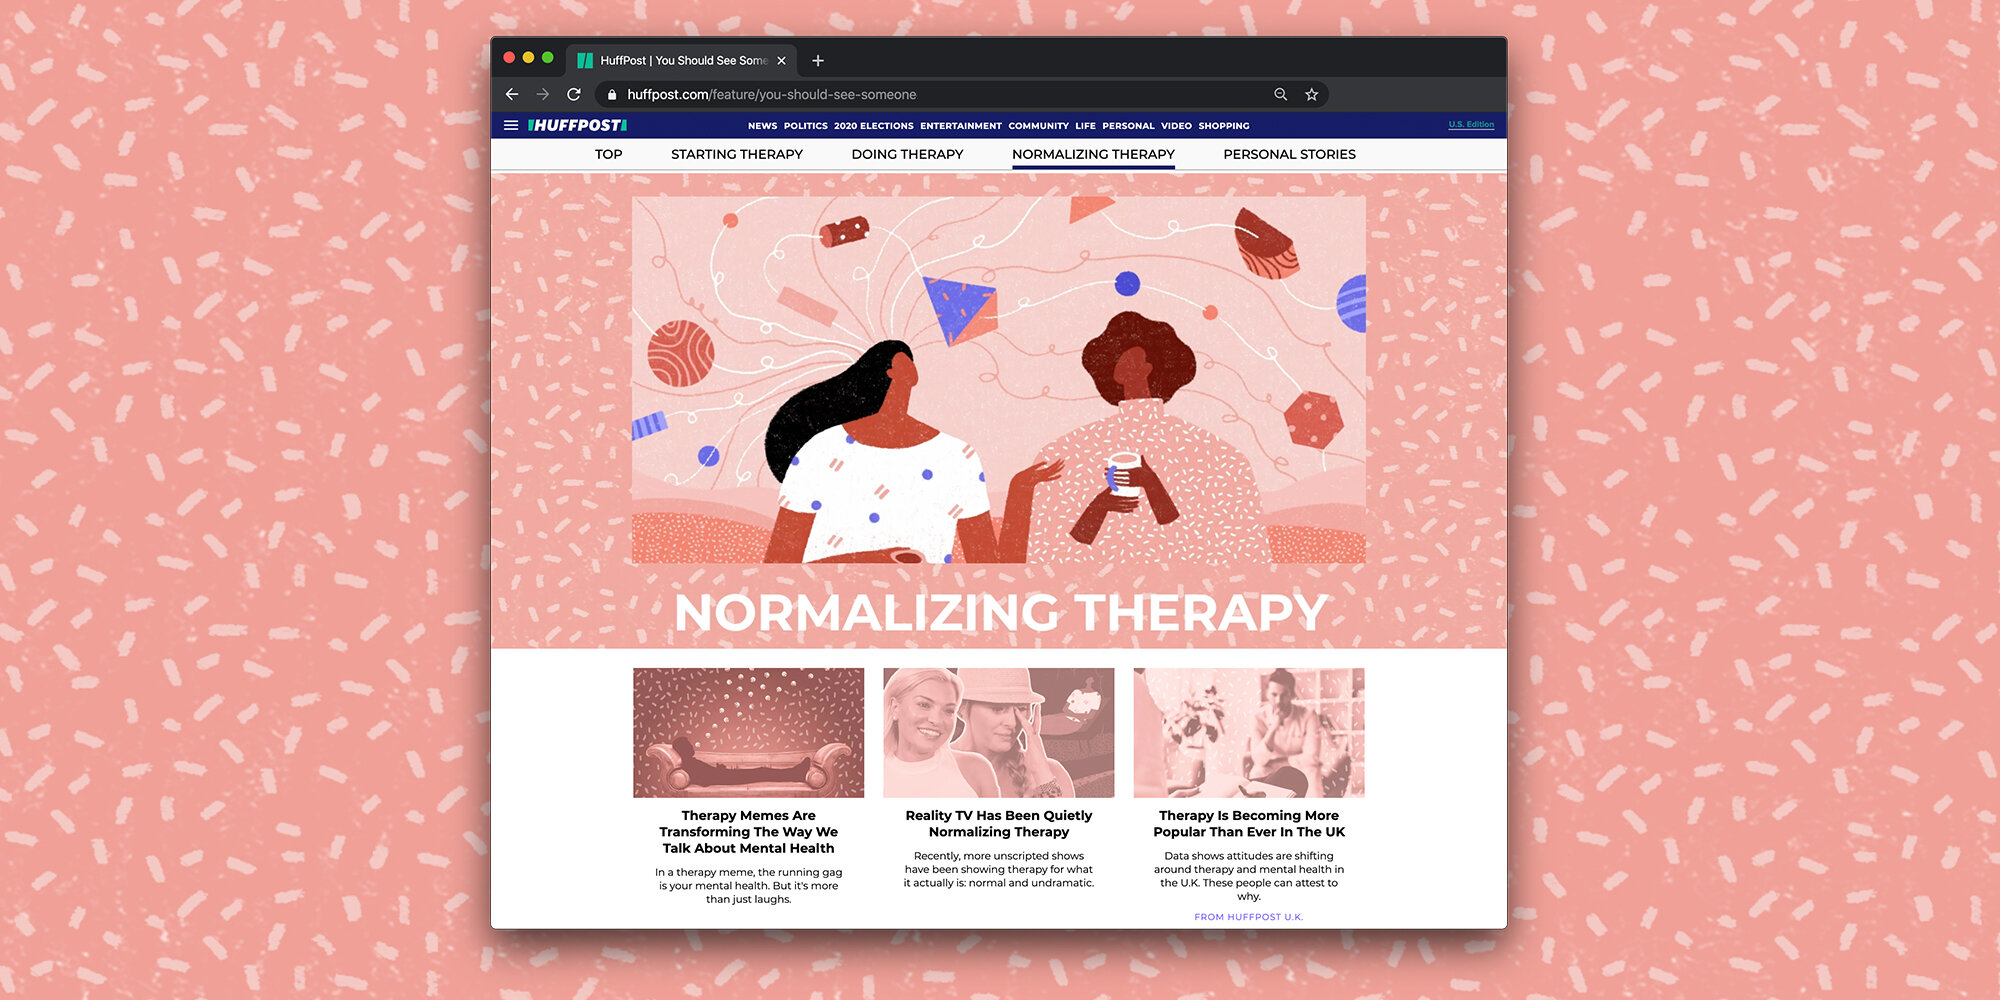  “Normalizing Therapy” section with part of the accompanying articles. 